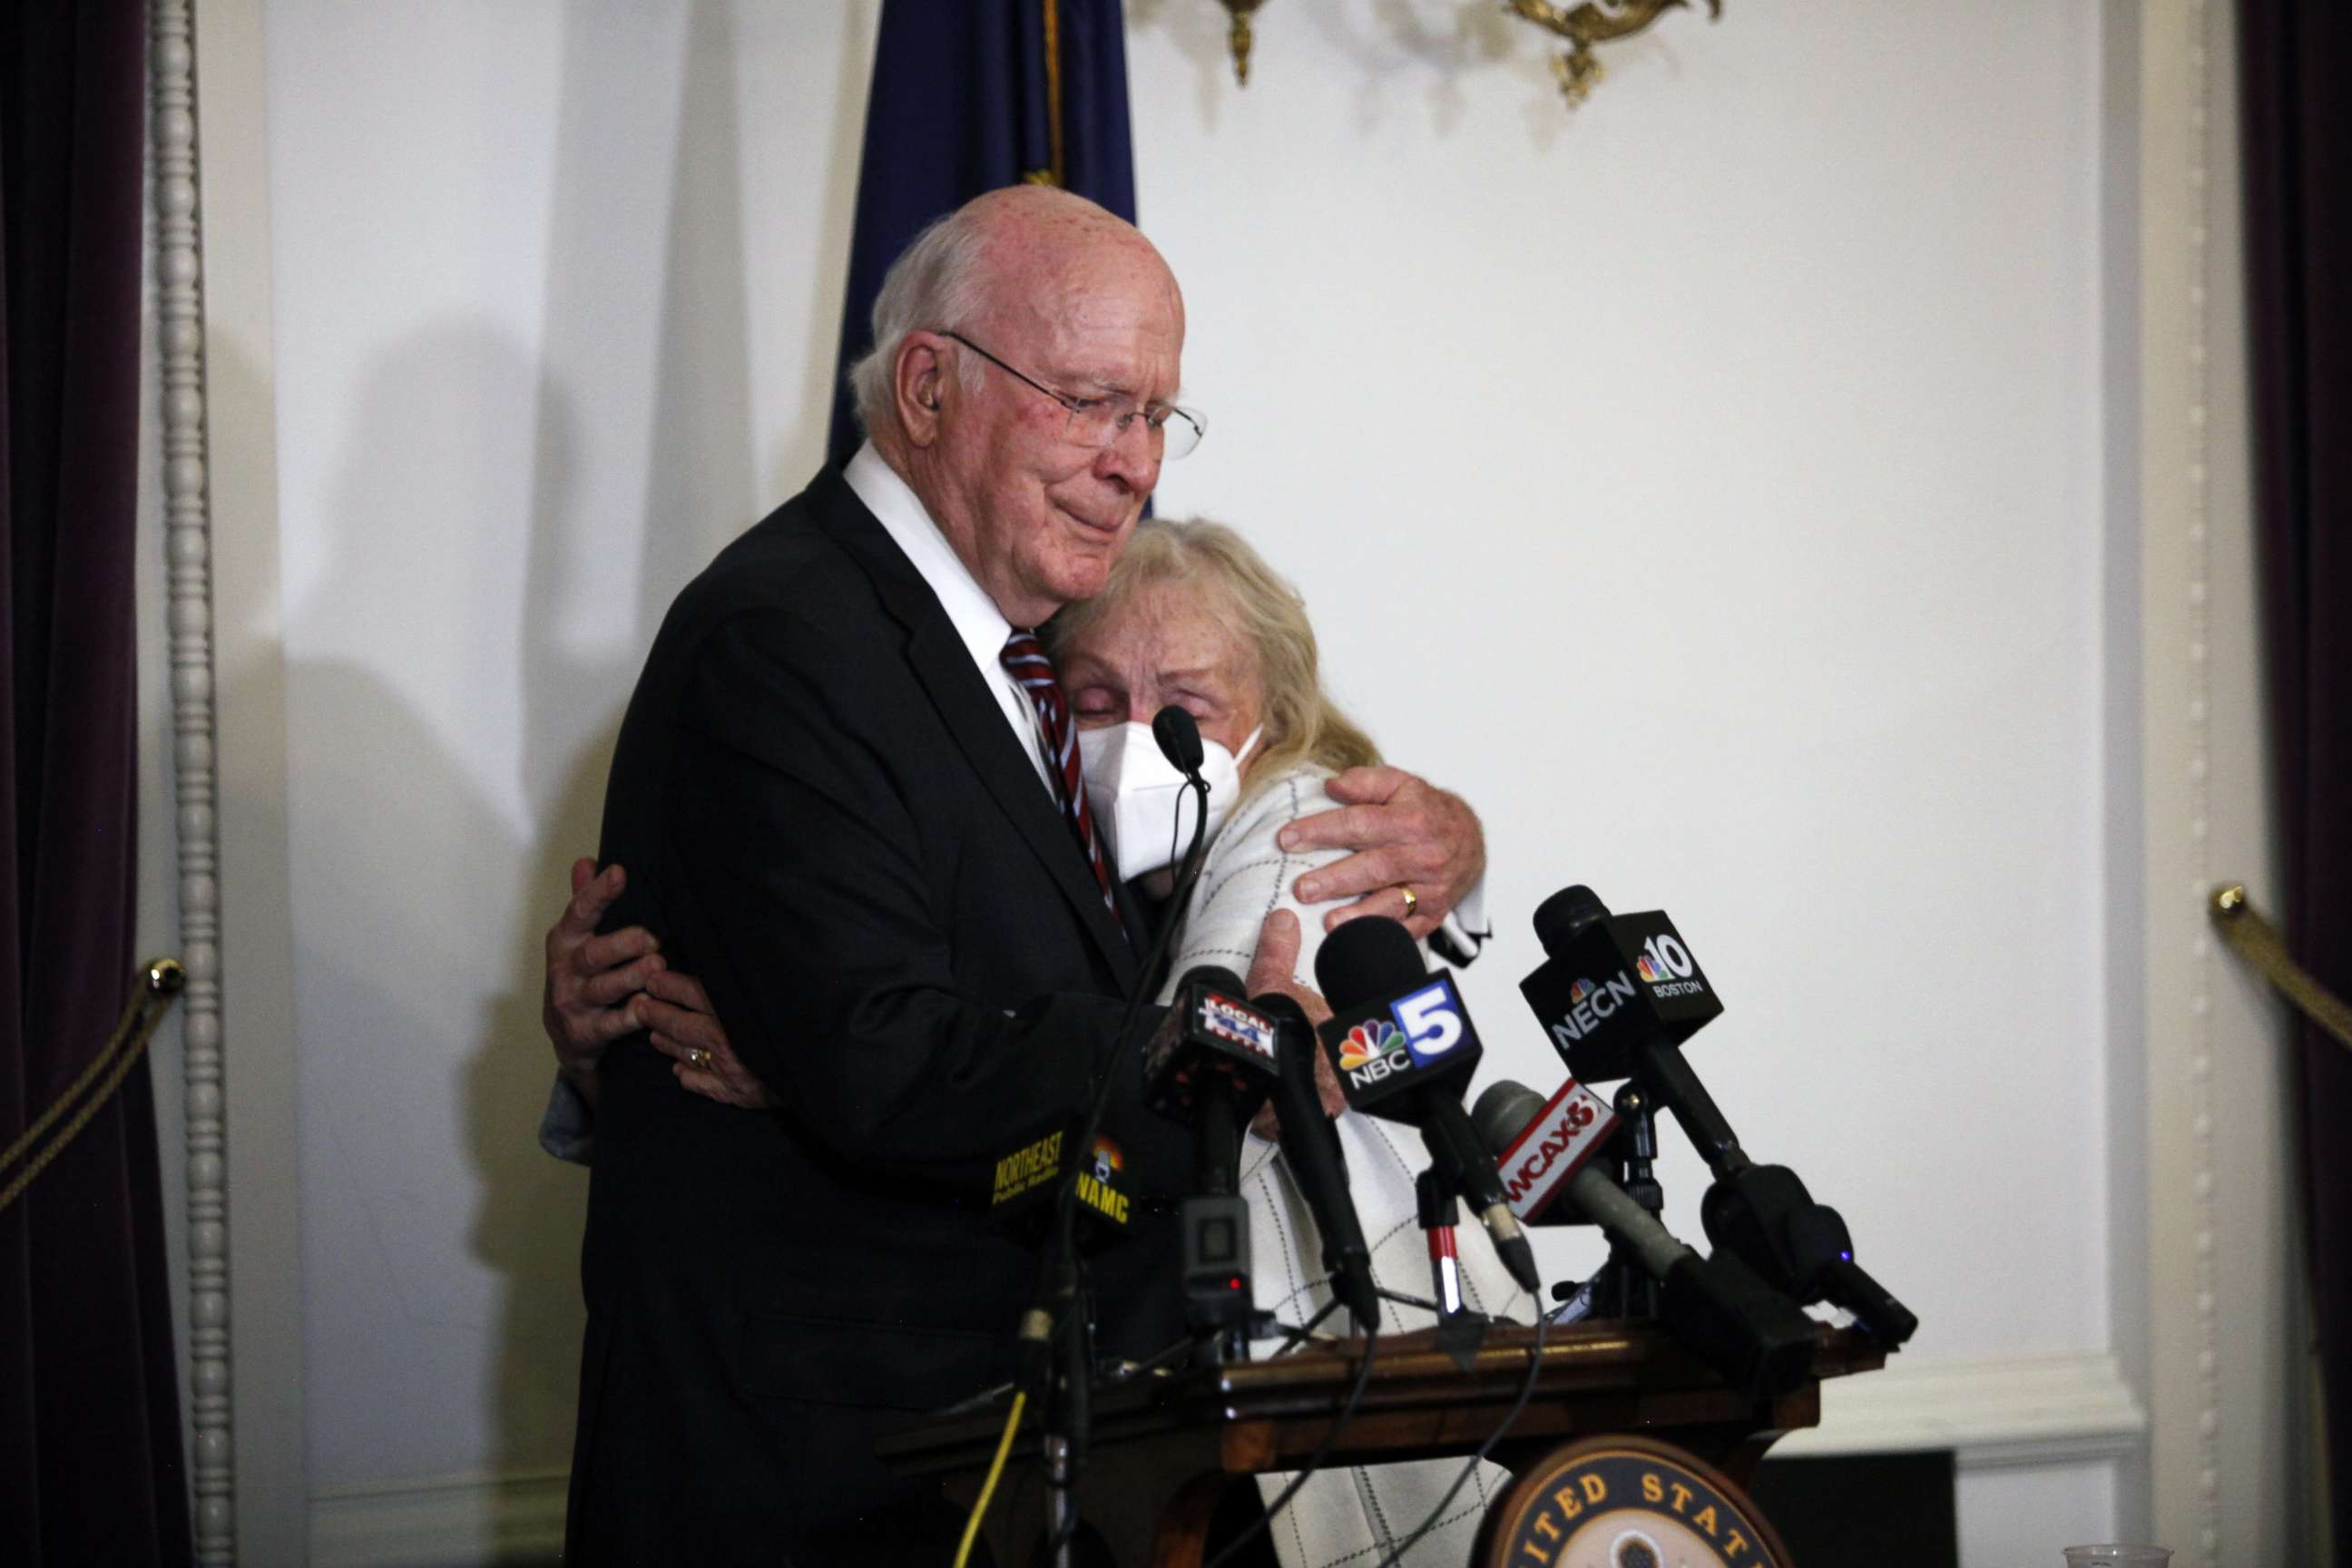 PHOTO: Senator Patrick Leahy and his wife Marcelle Pomerleau hug as he announces his decision to not run for another term in the Senate, outside the Vermont Statehouse in Montpelier, Vt., Nov. 15, 2021.